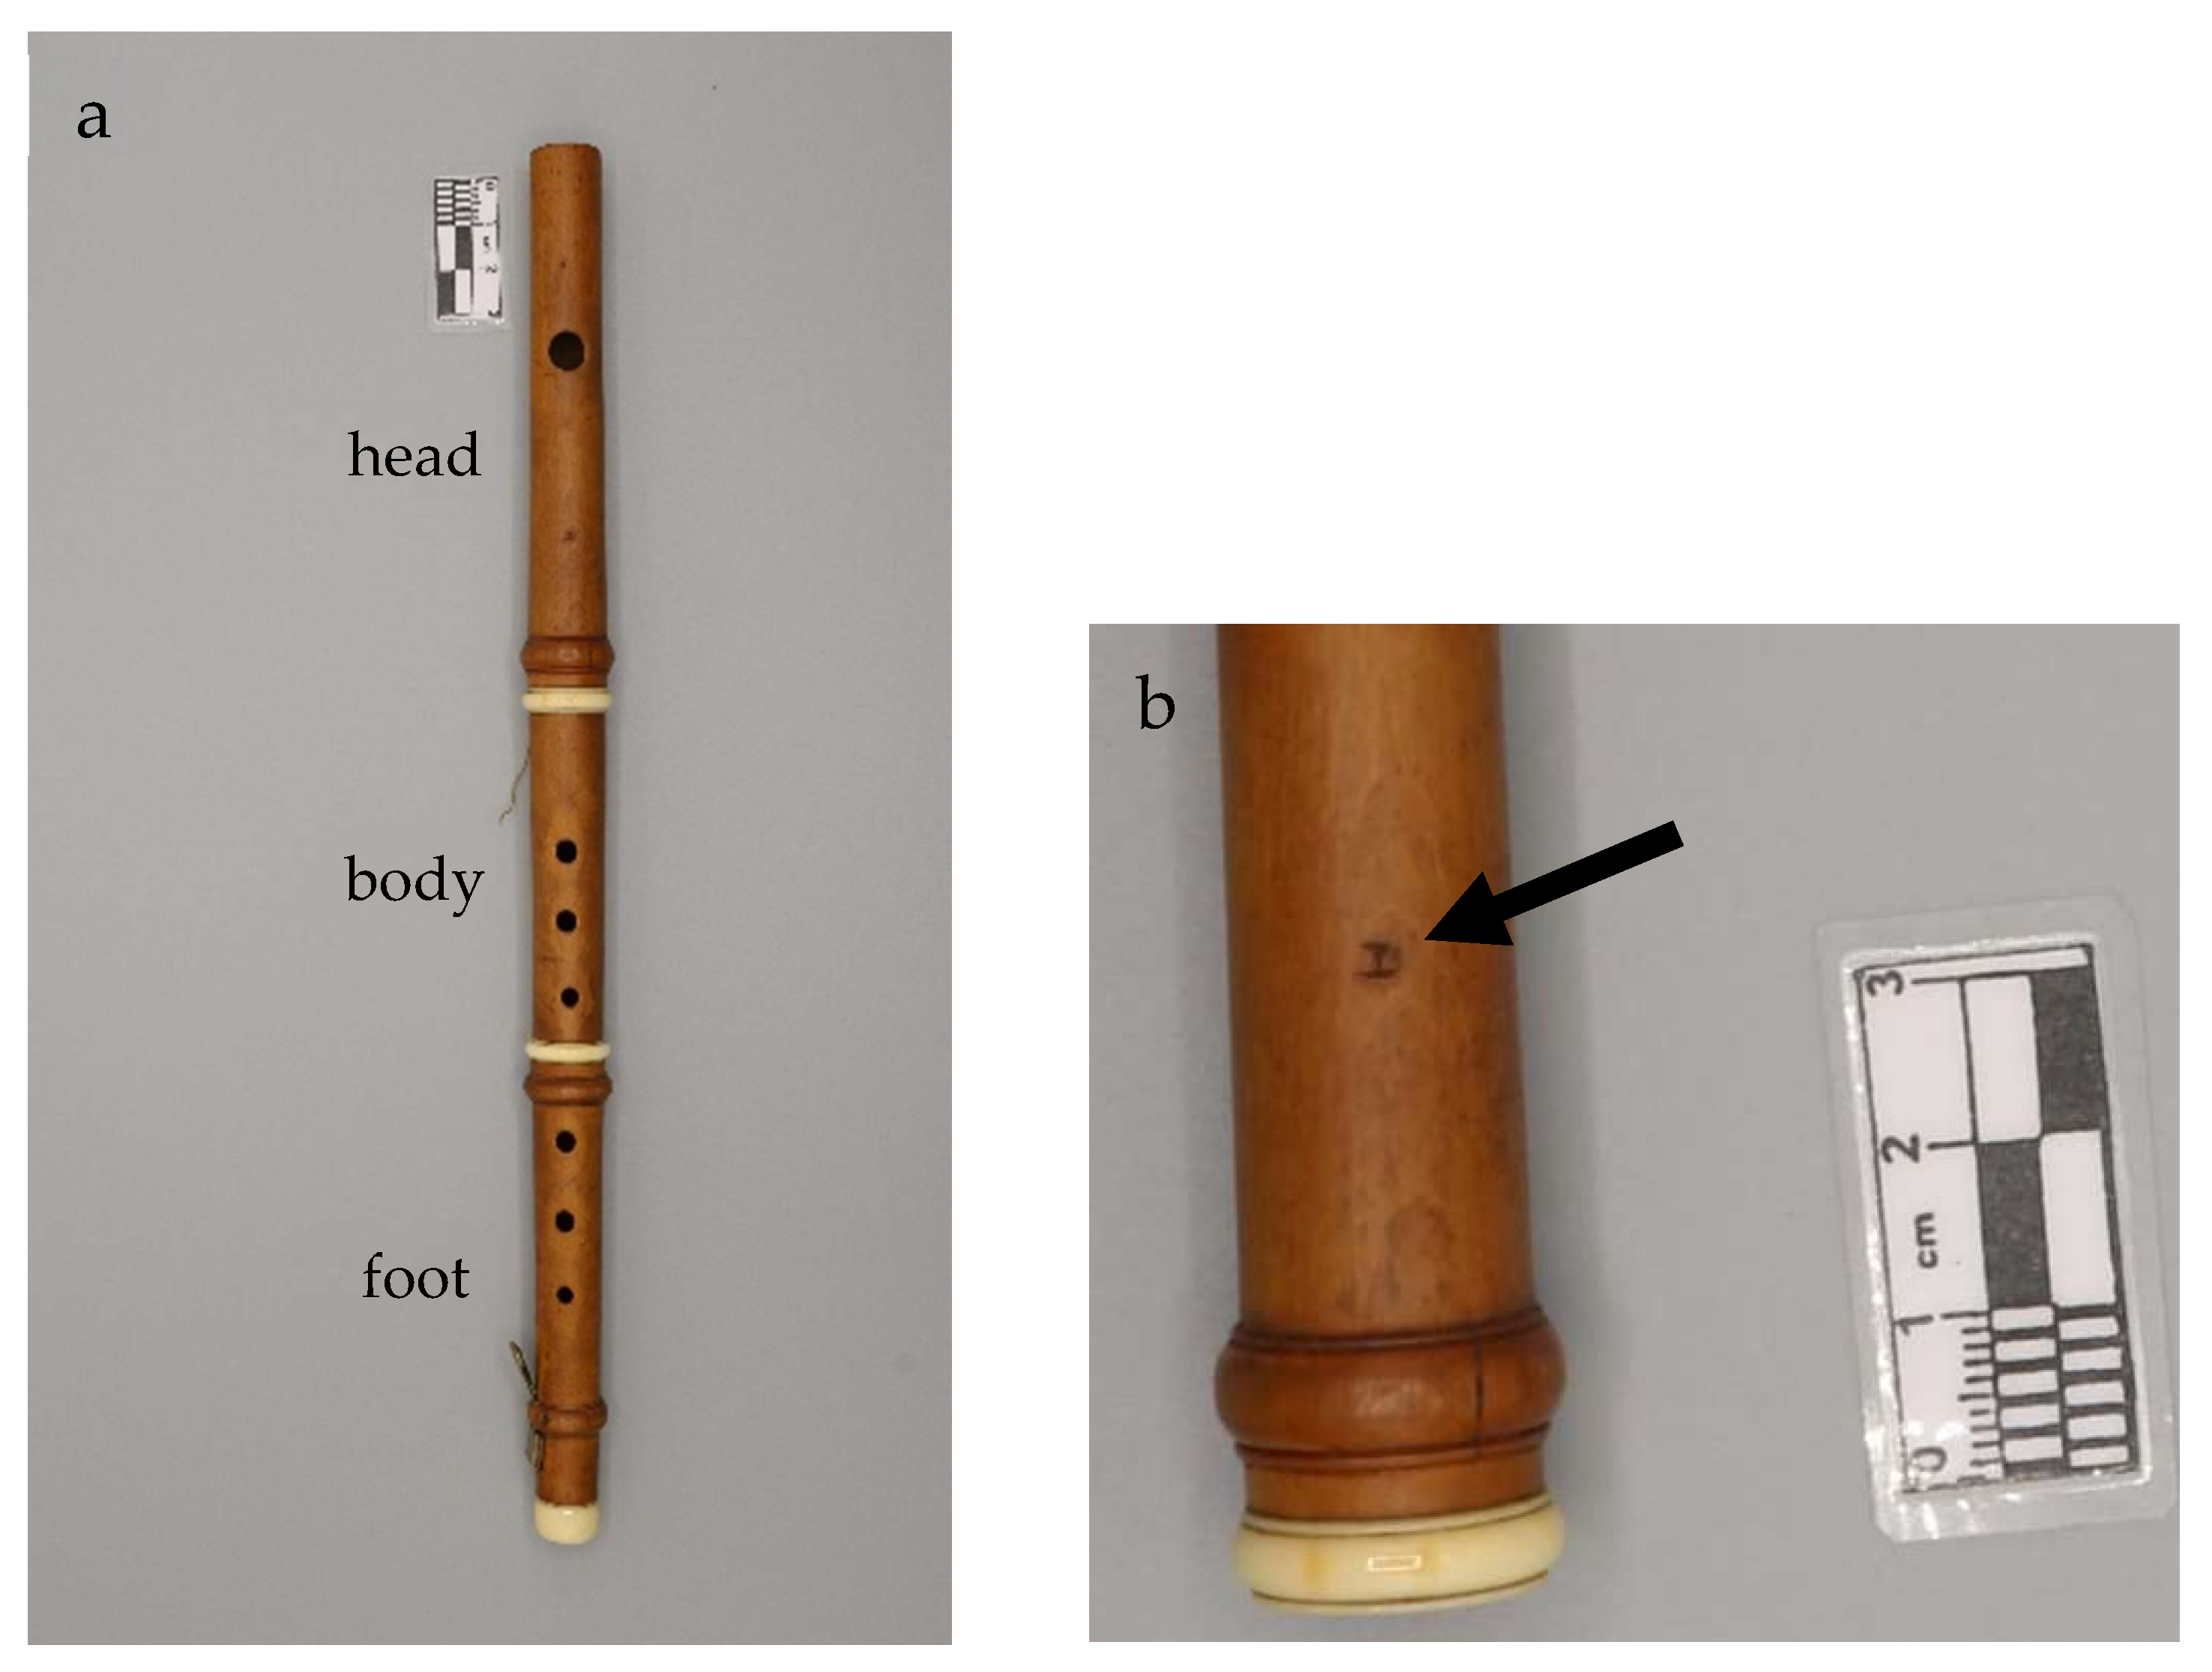 J. Imaging | Free Full-Text | X-ray Computed Tomography Analysis of  Historical Woodwind Instruments of the Late Eighteenth Century